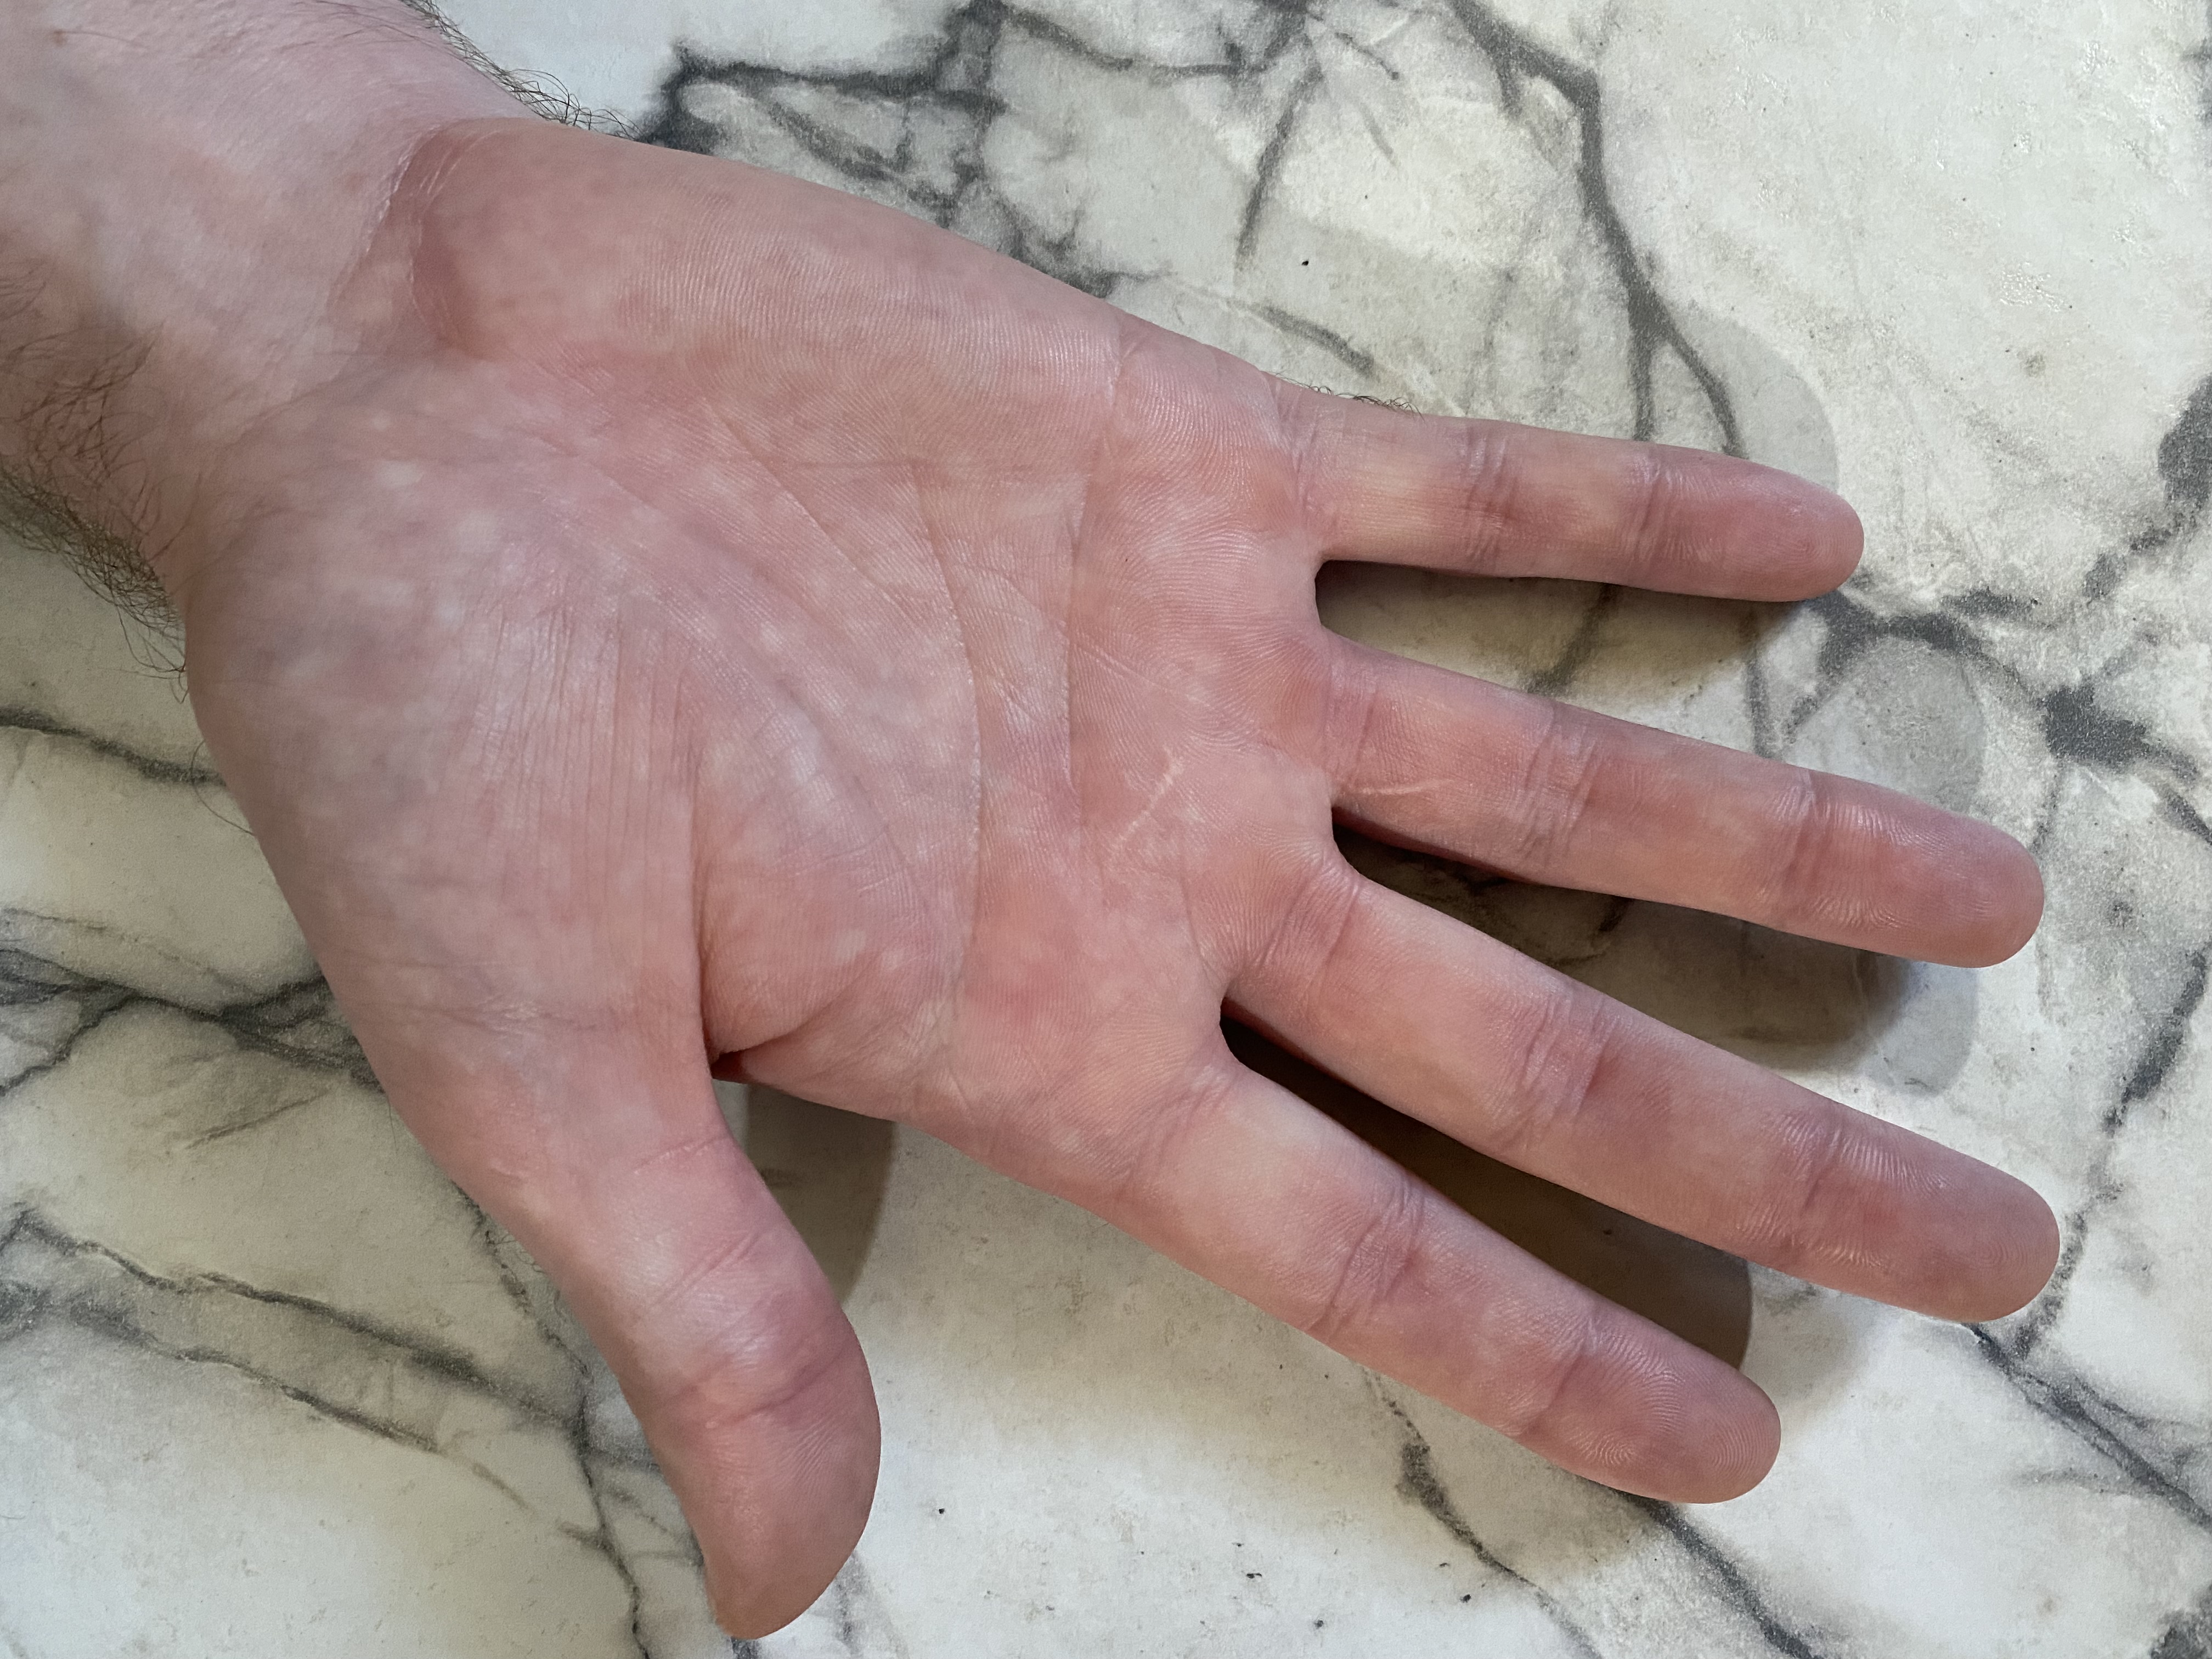 A close up of a man's right palm